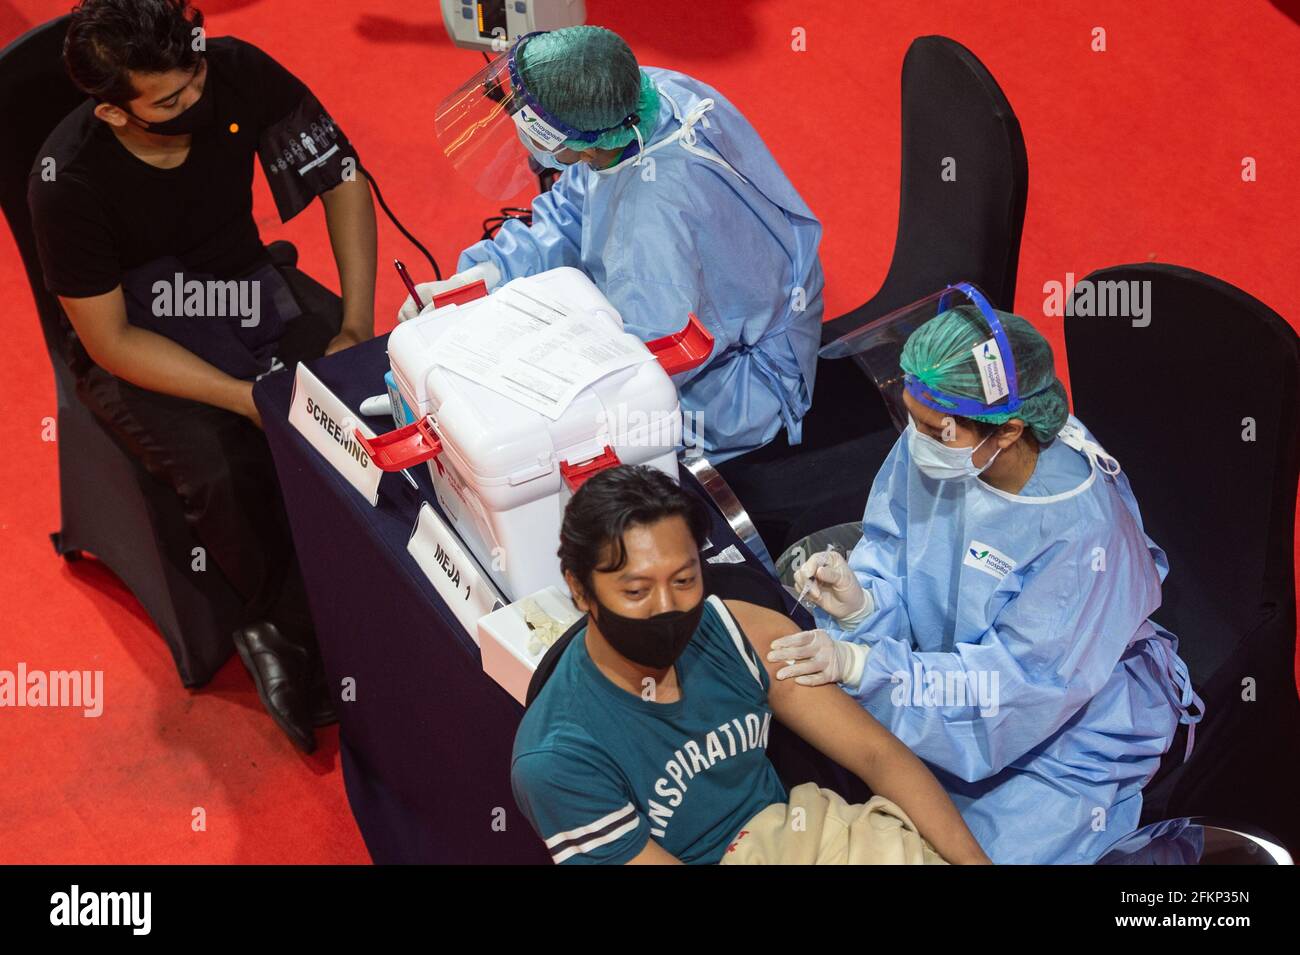 Jakarta, Indonesia. 3rd May, 2021. People get inoculated with COVID-19 vaccines in Jakarta, Indonesia, May 3, 2021. Credit: Veri Sanovri/Xinhua/Alamy Live News Stock Photo